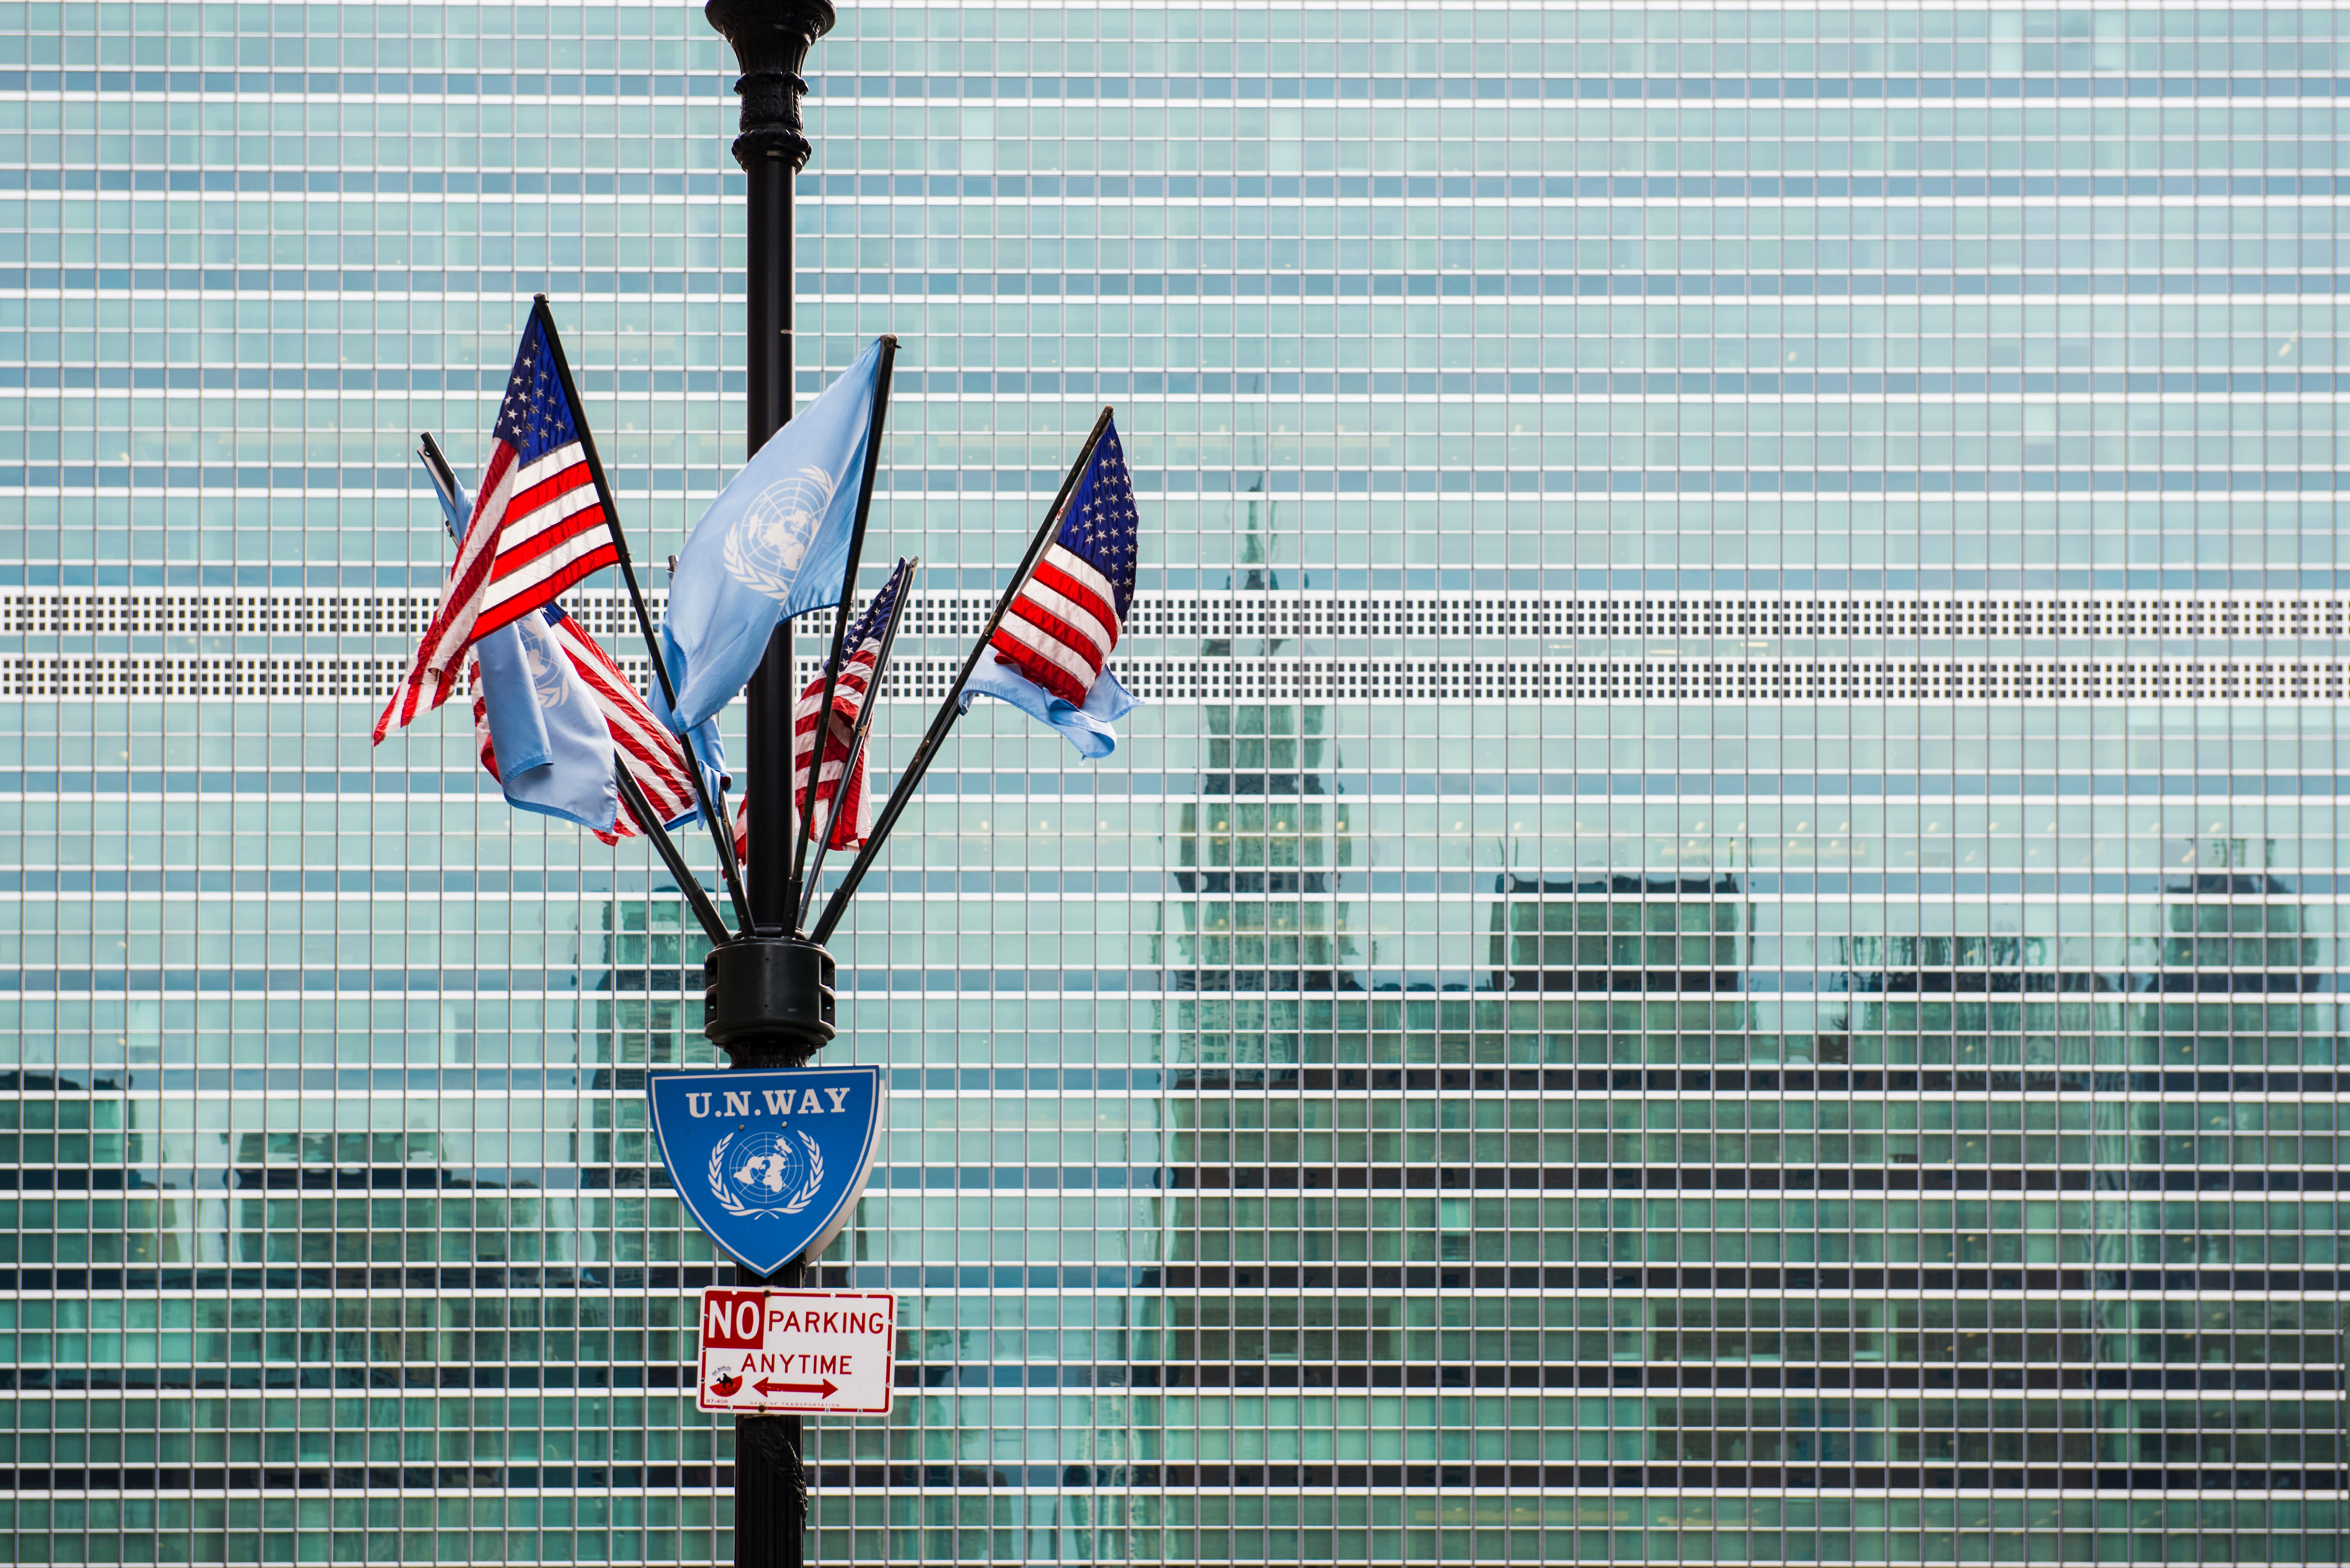 A pole with multiple American and UN flags hangind from it is positioned in front of a building with a reflective facade. The reflection of a city skyline is displayed on the building.